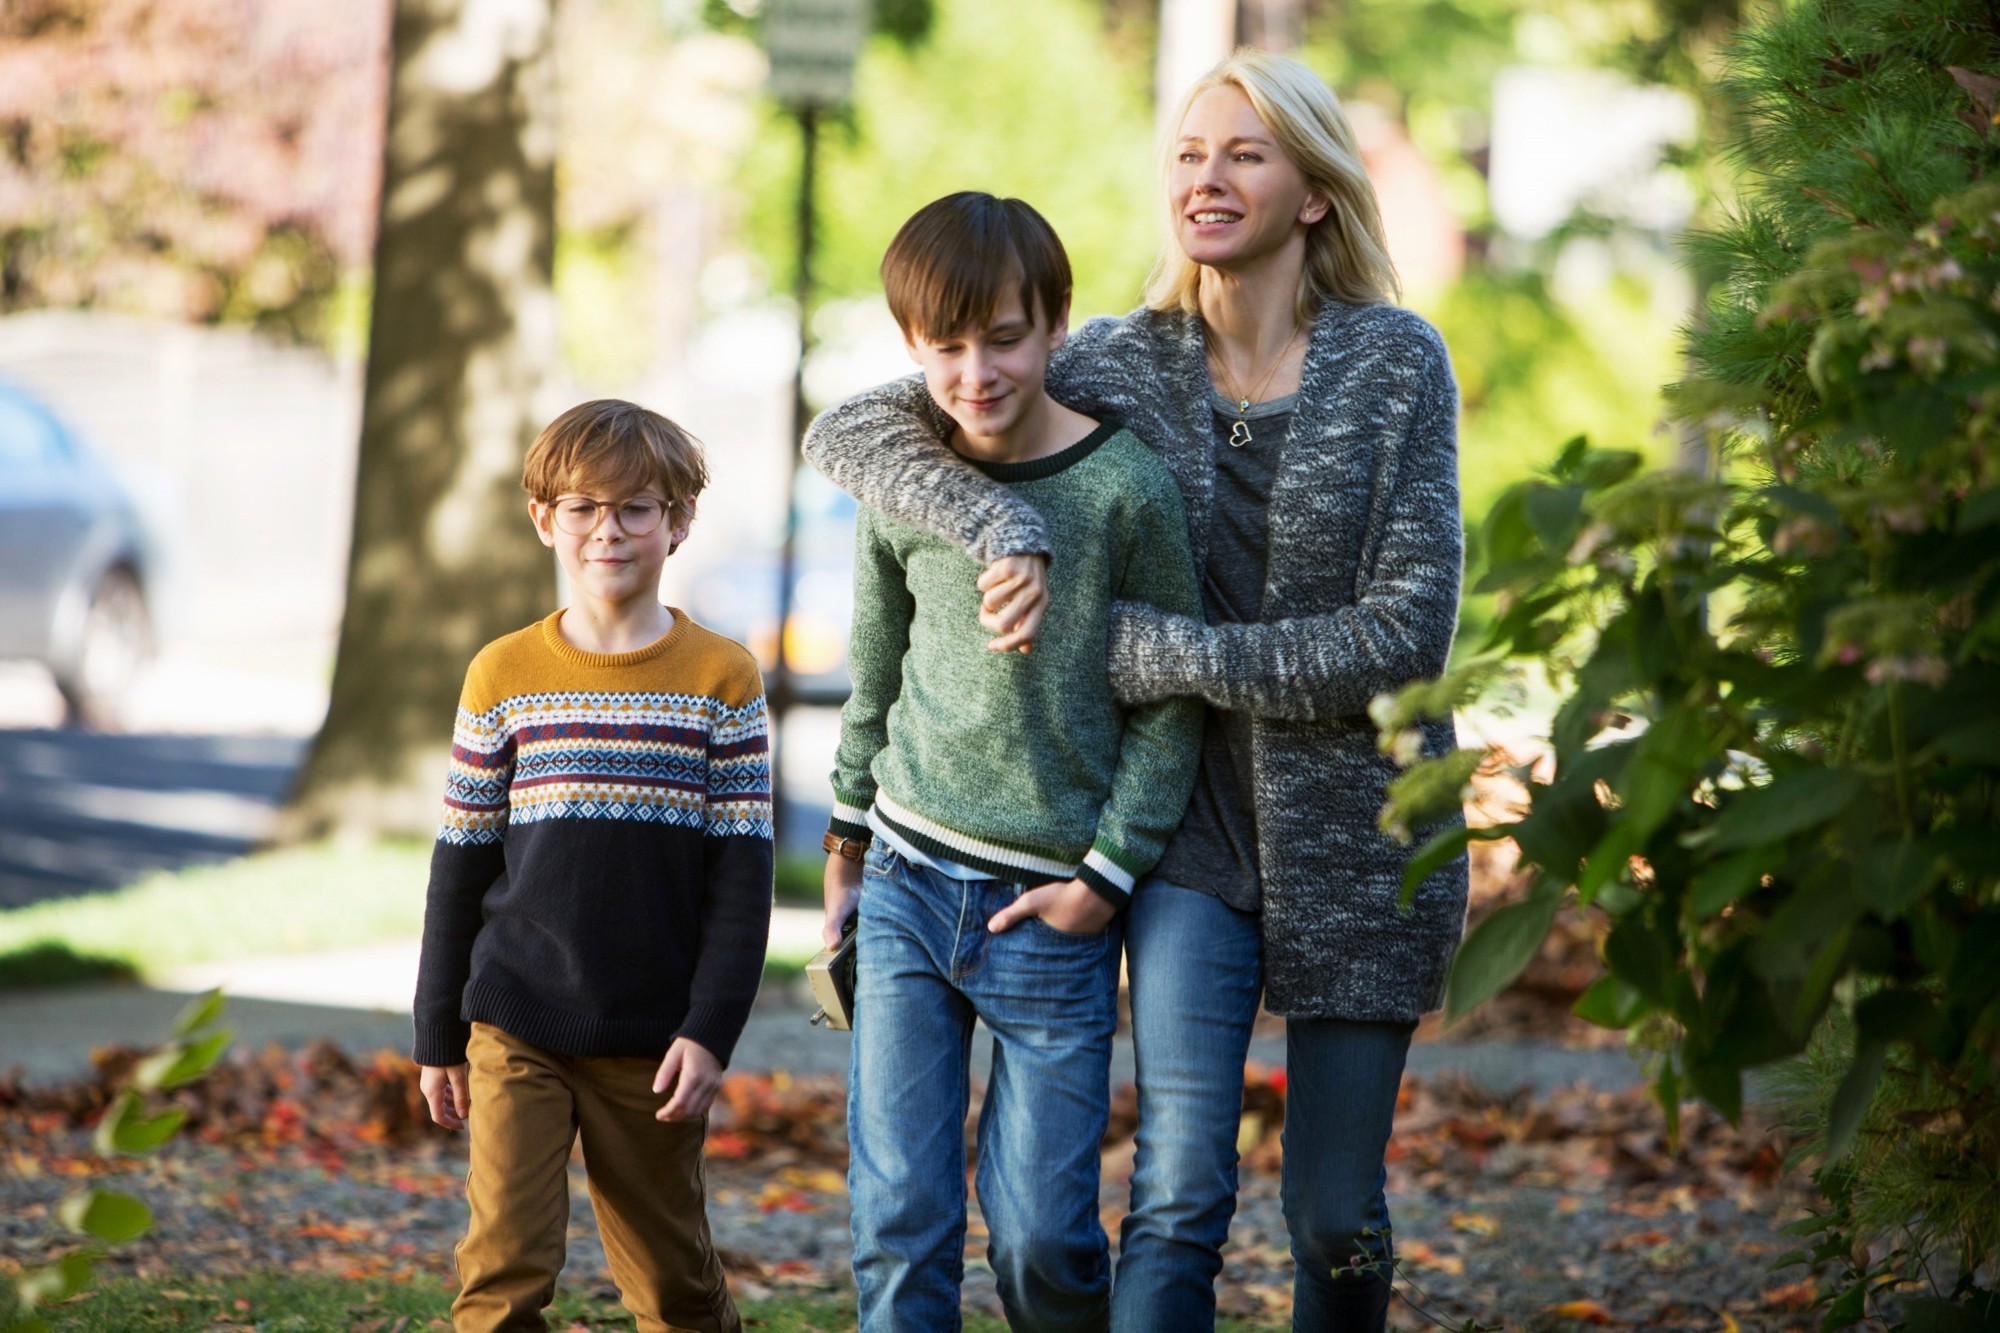 Jacob Tremblay, Jaeden Lieberher and Naomi Watts in Focus Features' The Book of Henry (2017)